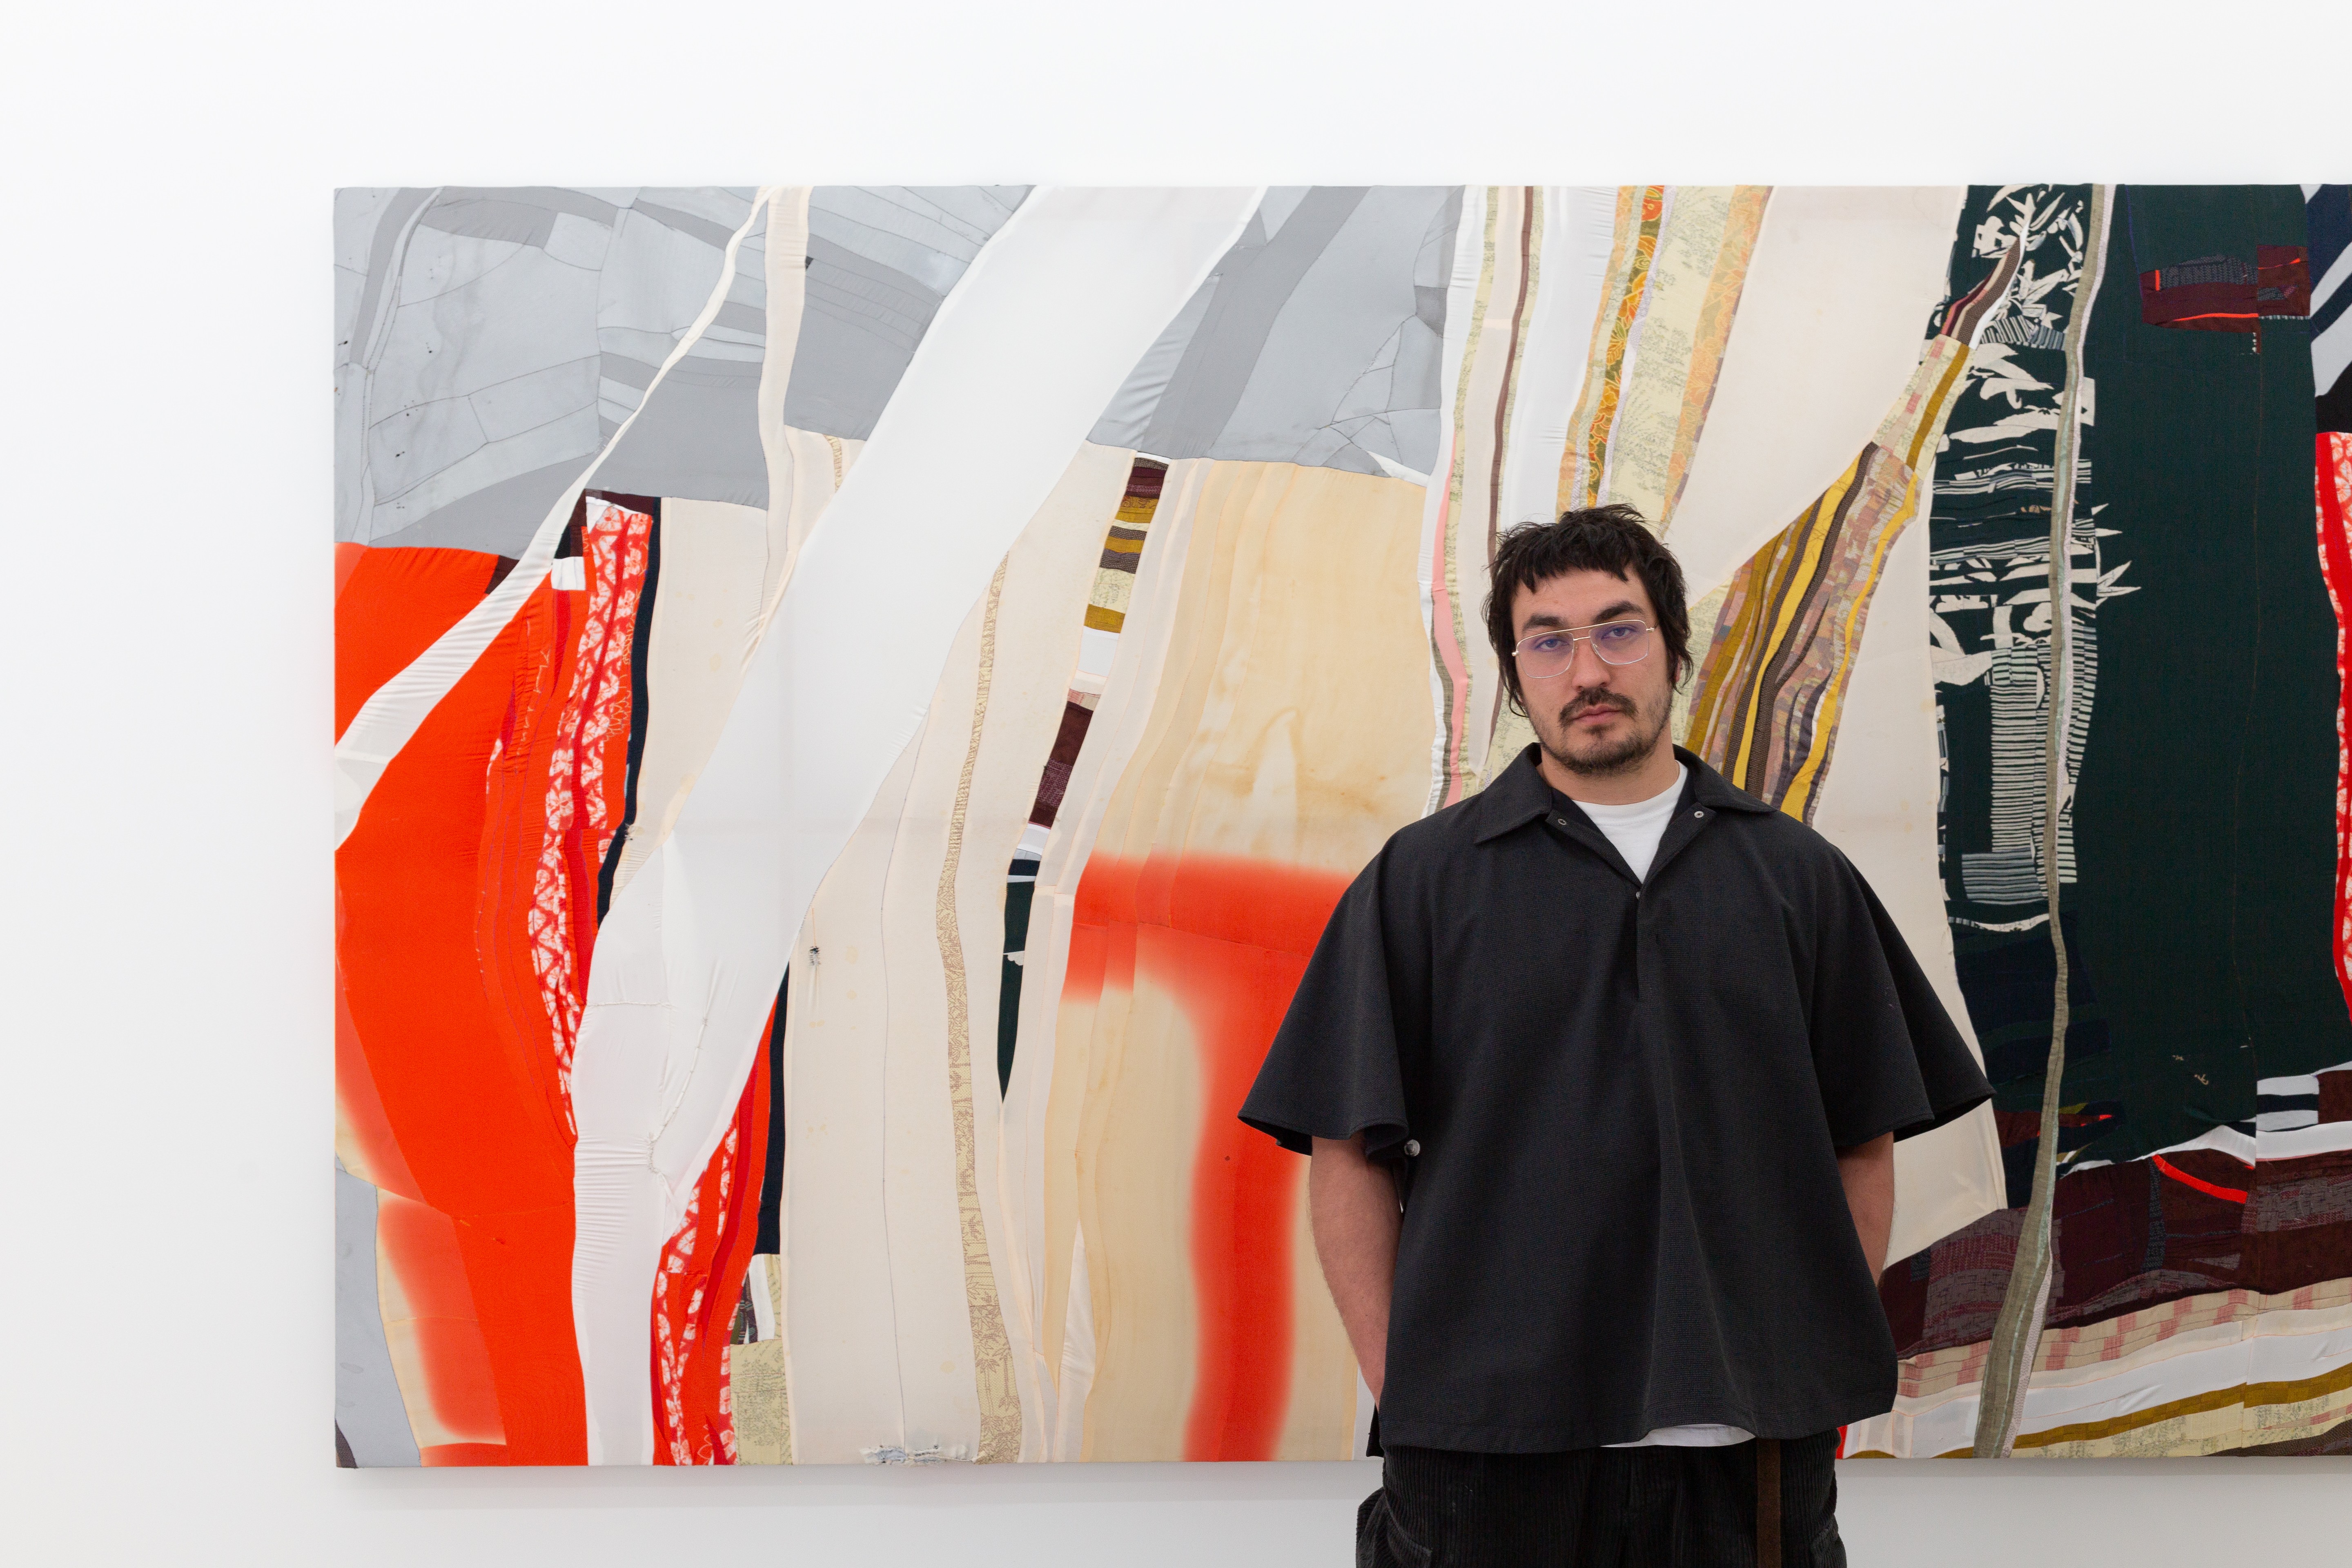 Dark haired man with glasses stands solemnly in front of a bright and large abstract artwork